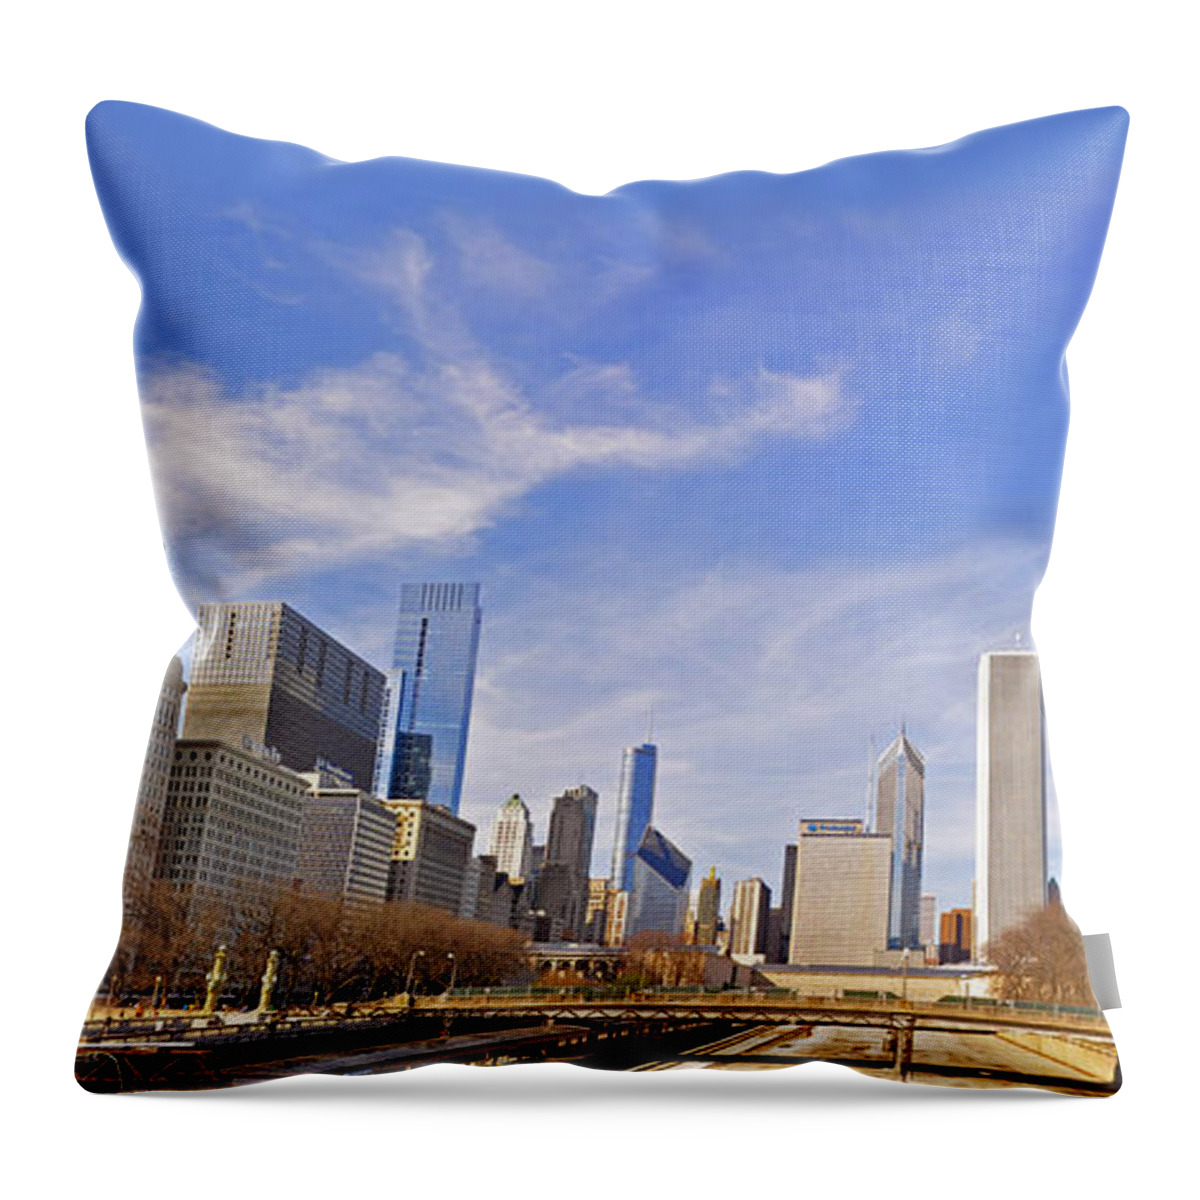 Grant Park Throw Pillow featuring the photograph Grant Park Chicago by Dejan Jovanovic